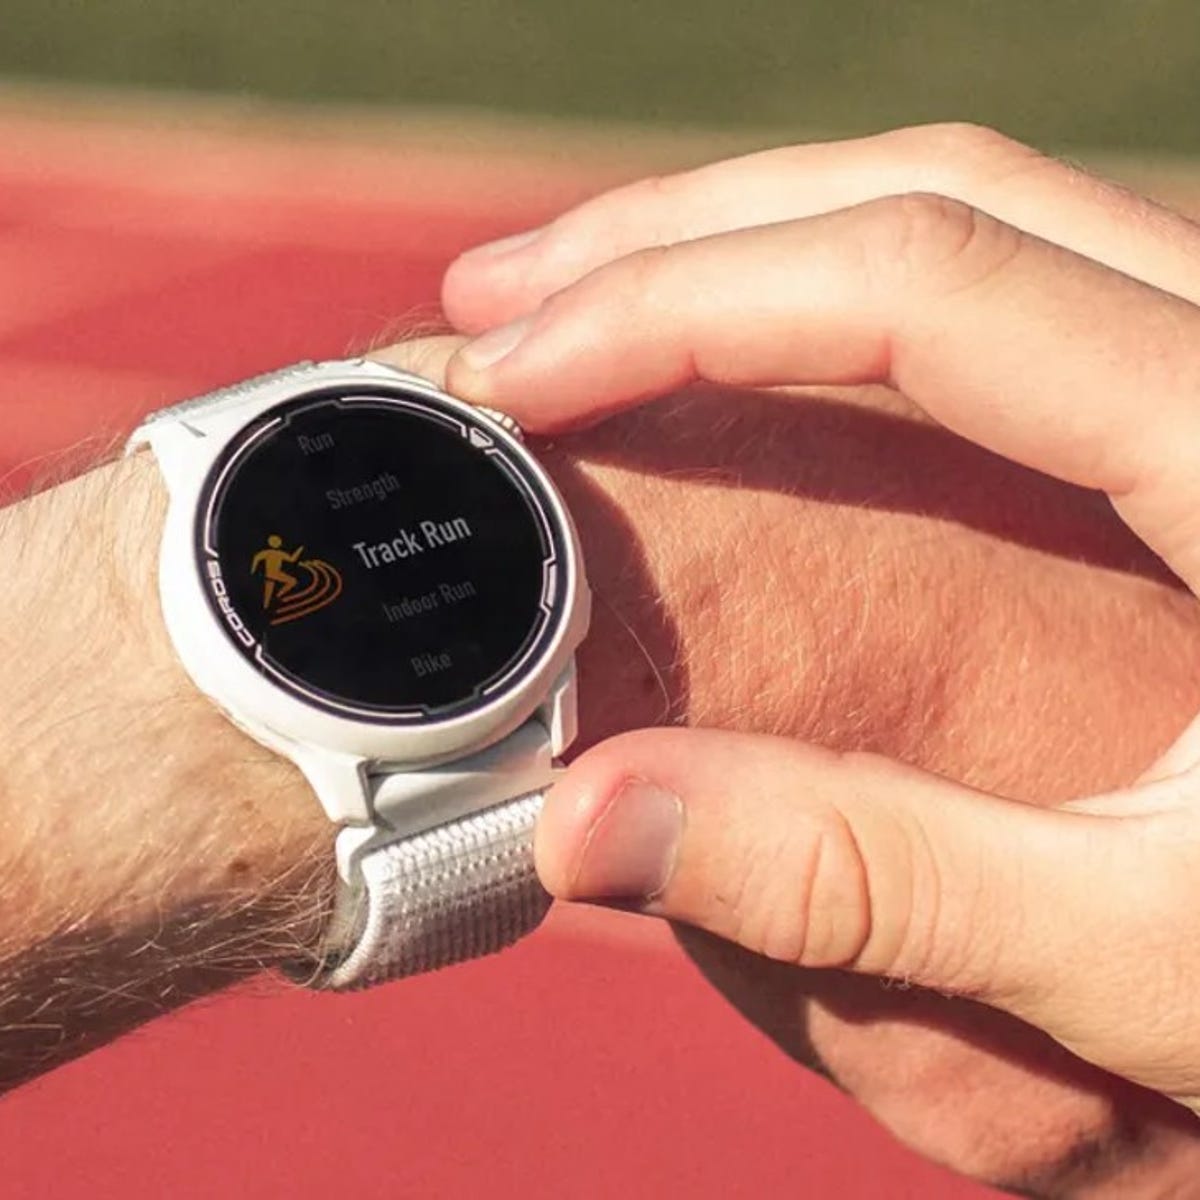 tilgive Arctic ophavsret The 12 best sports watches of 2022 according to experts | ZDNET